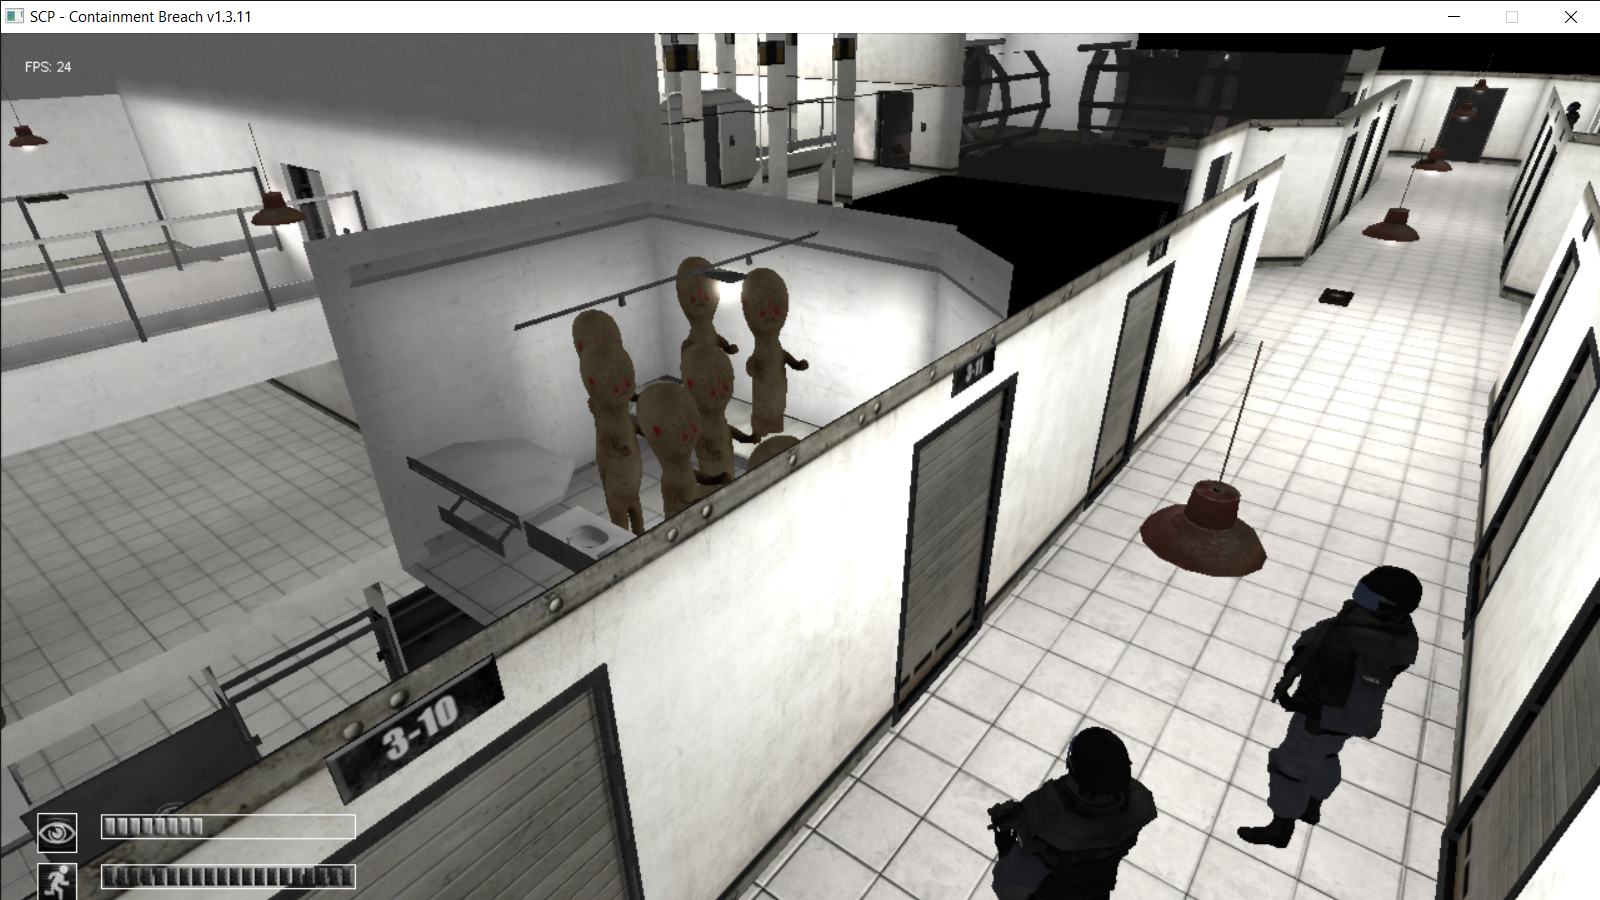 FOV Mod Now Updated To v1.3.11 of SCP - Containment Breach news - Mod DB